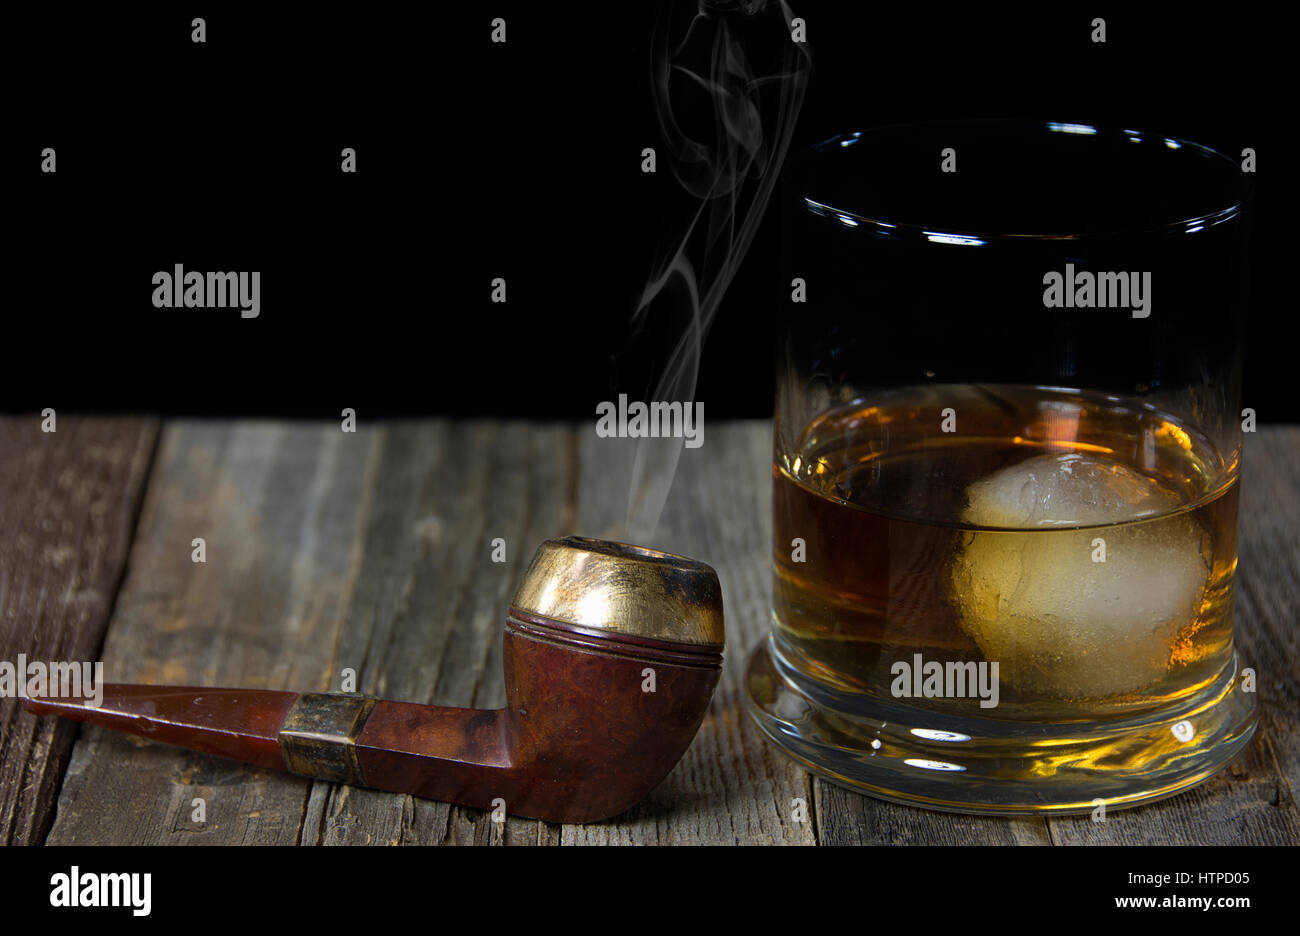 smoking-pipe-with-whiskey-drink-on-rustic-wood-HTPD05.jpg